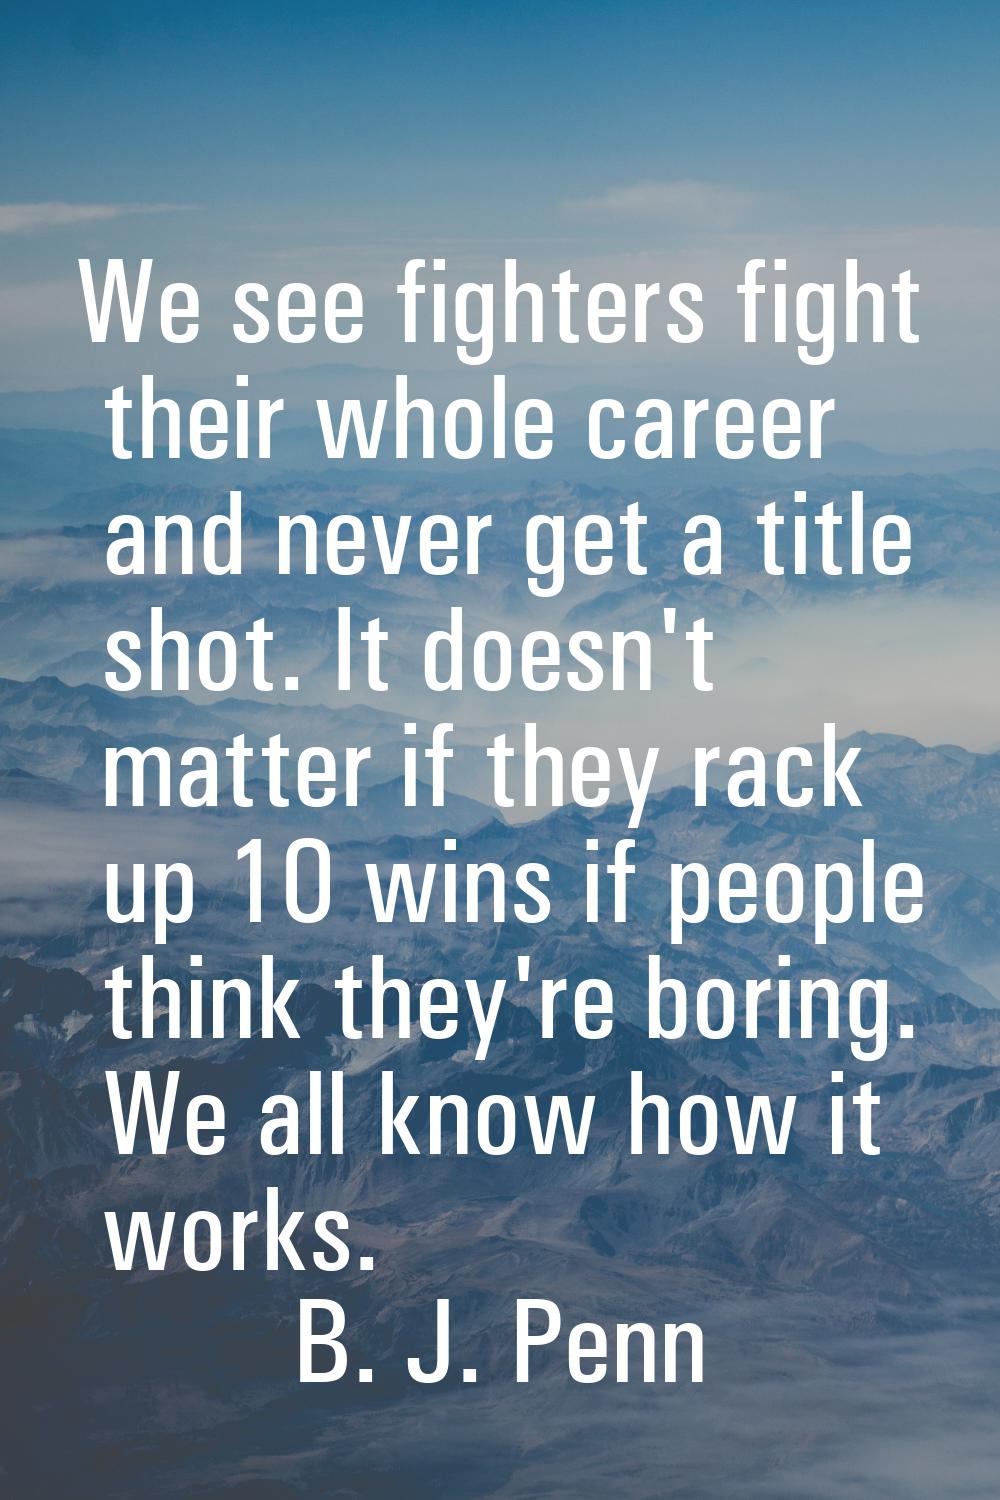 We see fighters fight their whole career and never get a title shot. It doesn't matter if they rack